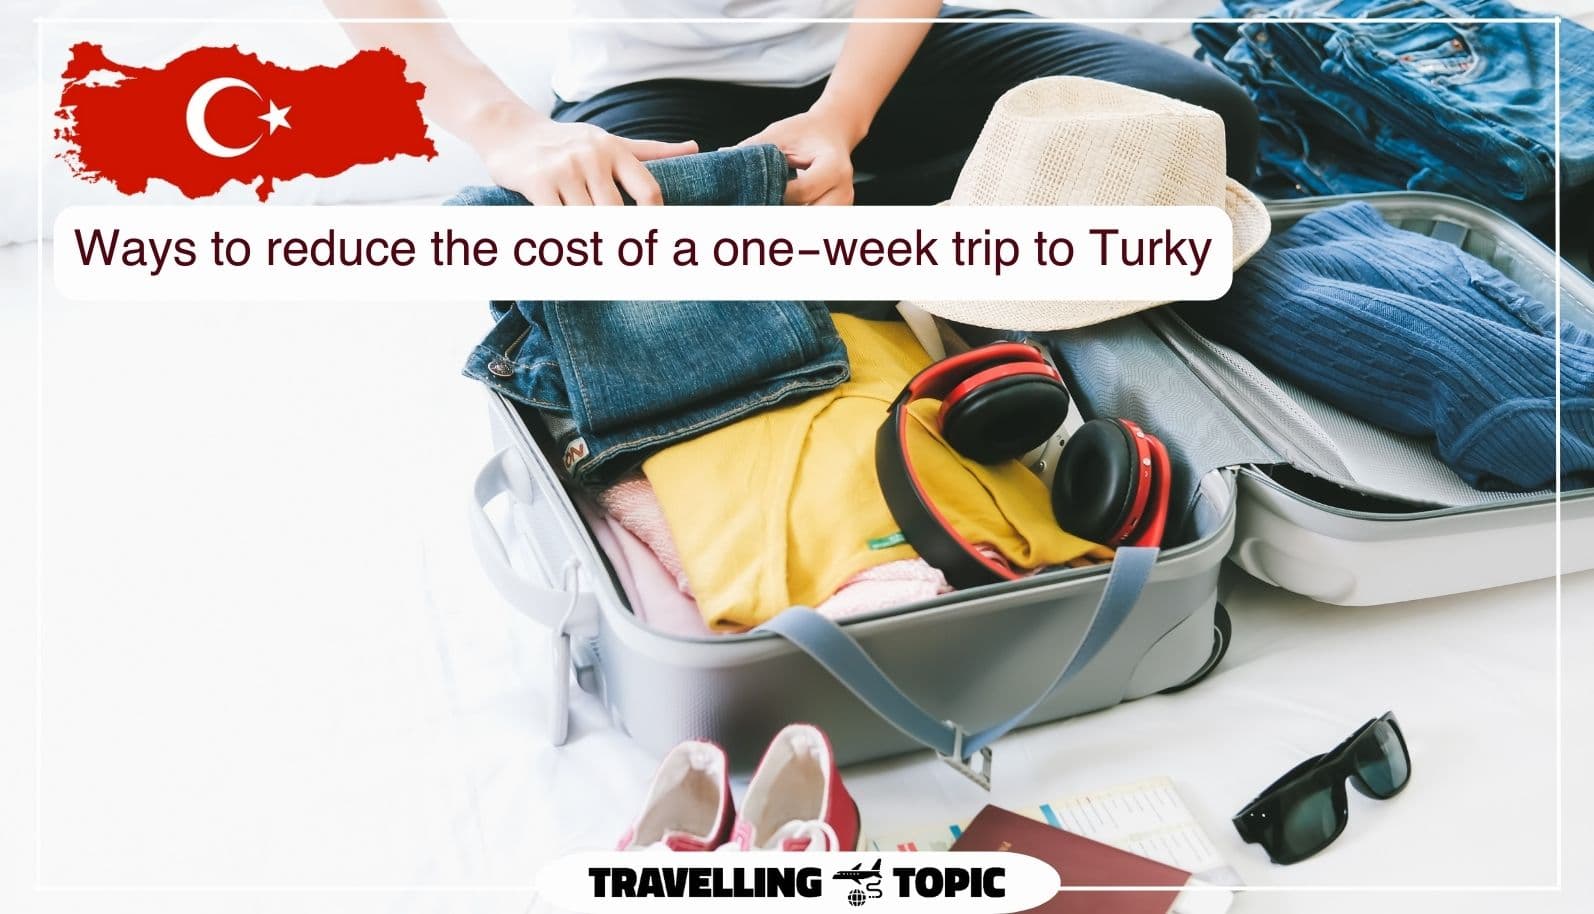 Ways to reduce the cost of a one-week trip to Turky